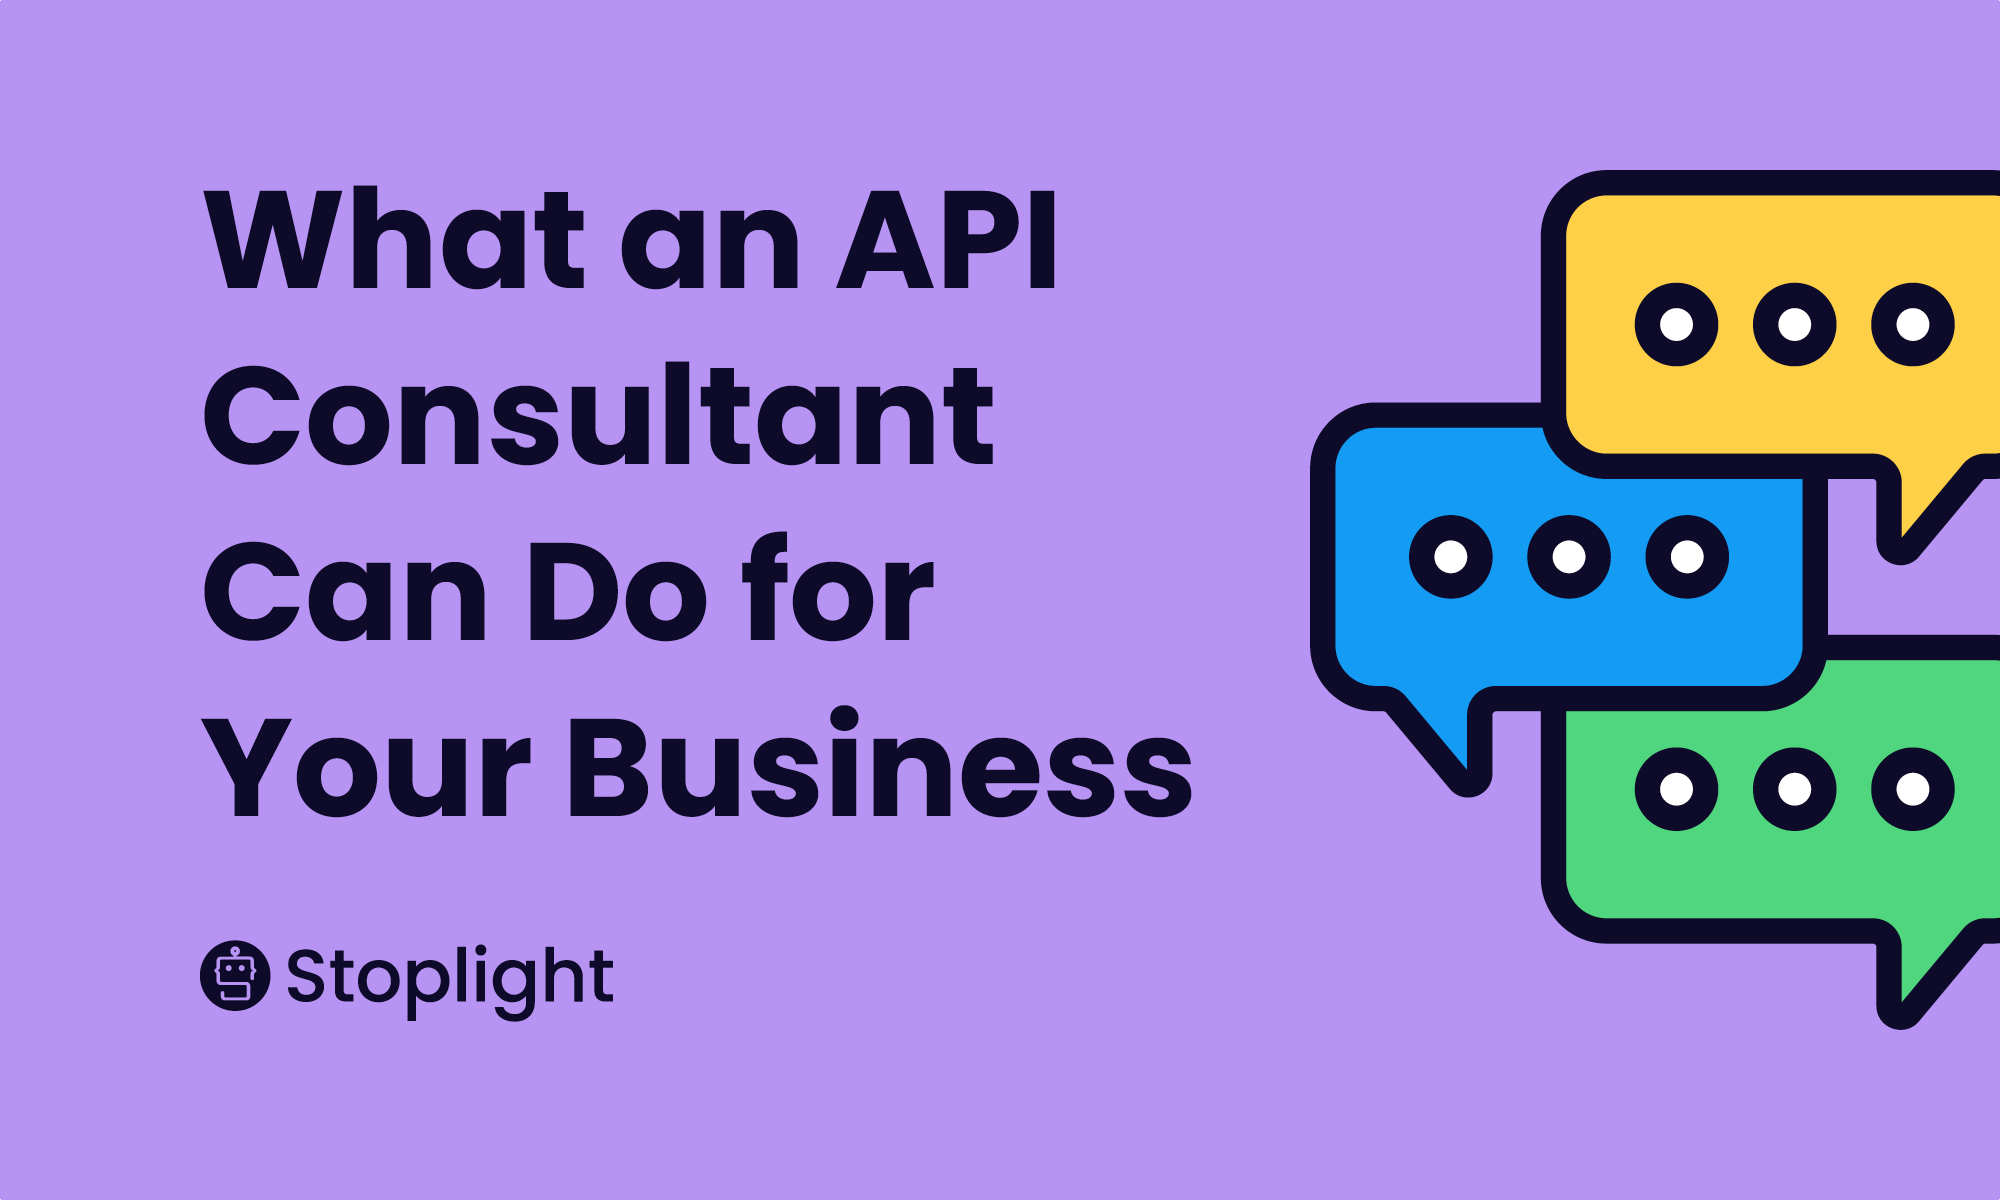 What an API Consultant Can Do for Your Business